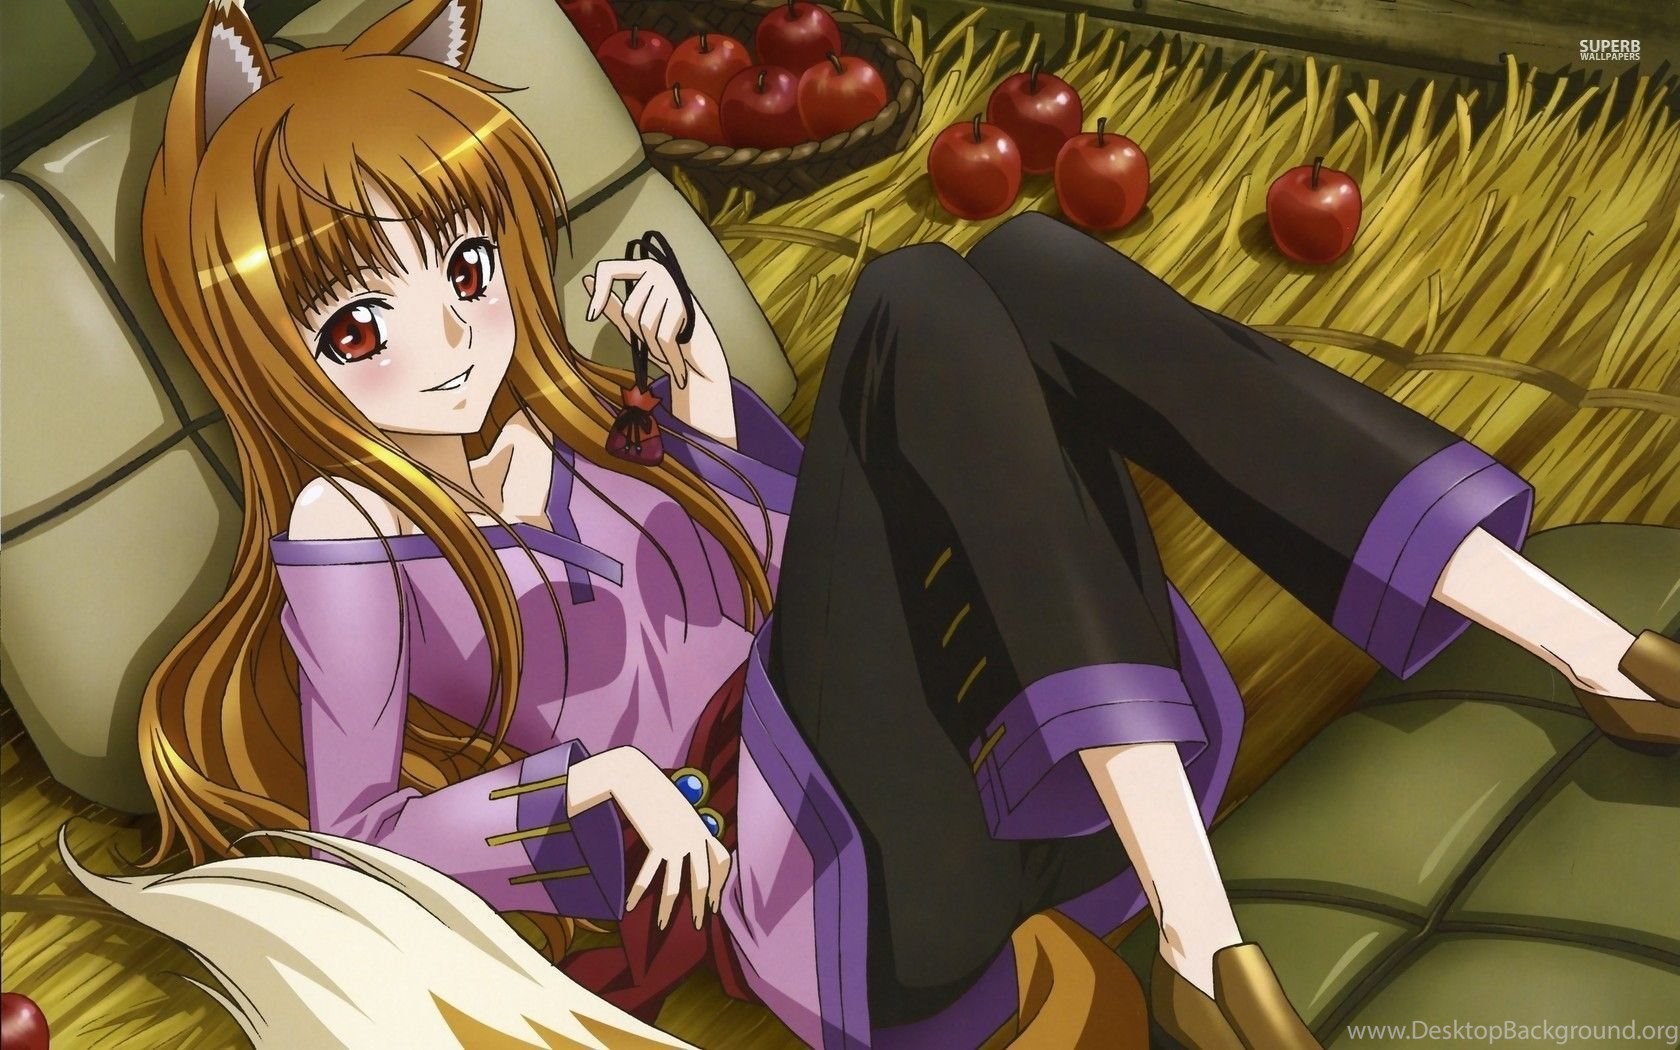 Holo In Spice And Wolf Wallpapers Anime Wallpapers Desktop Background Images, Photos, Reviews